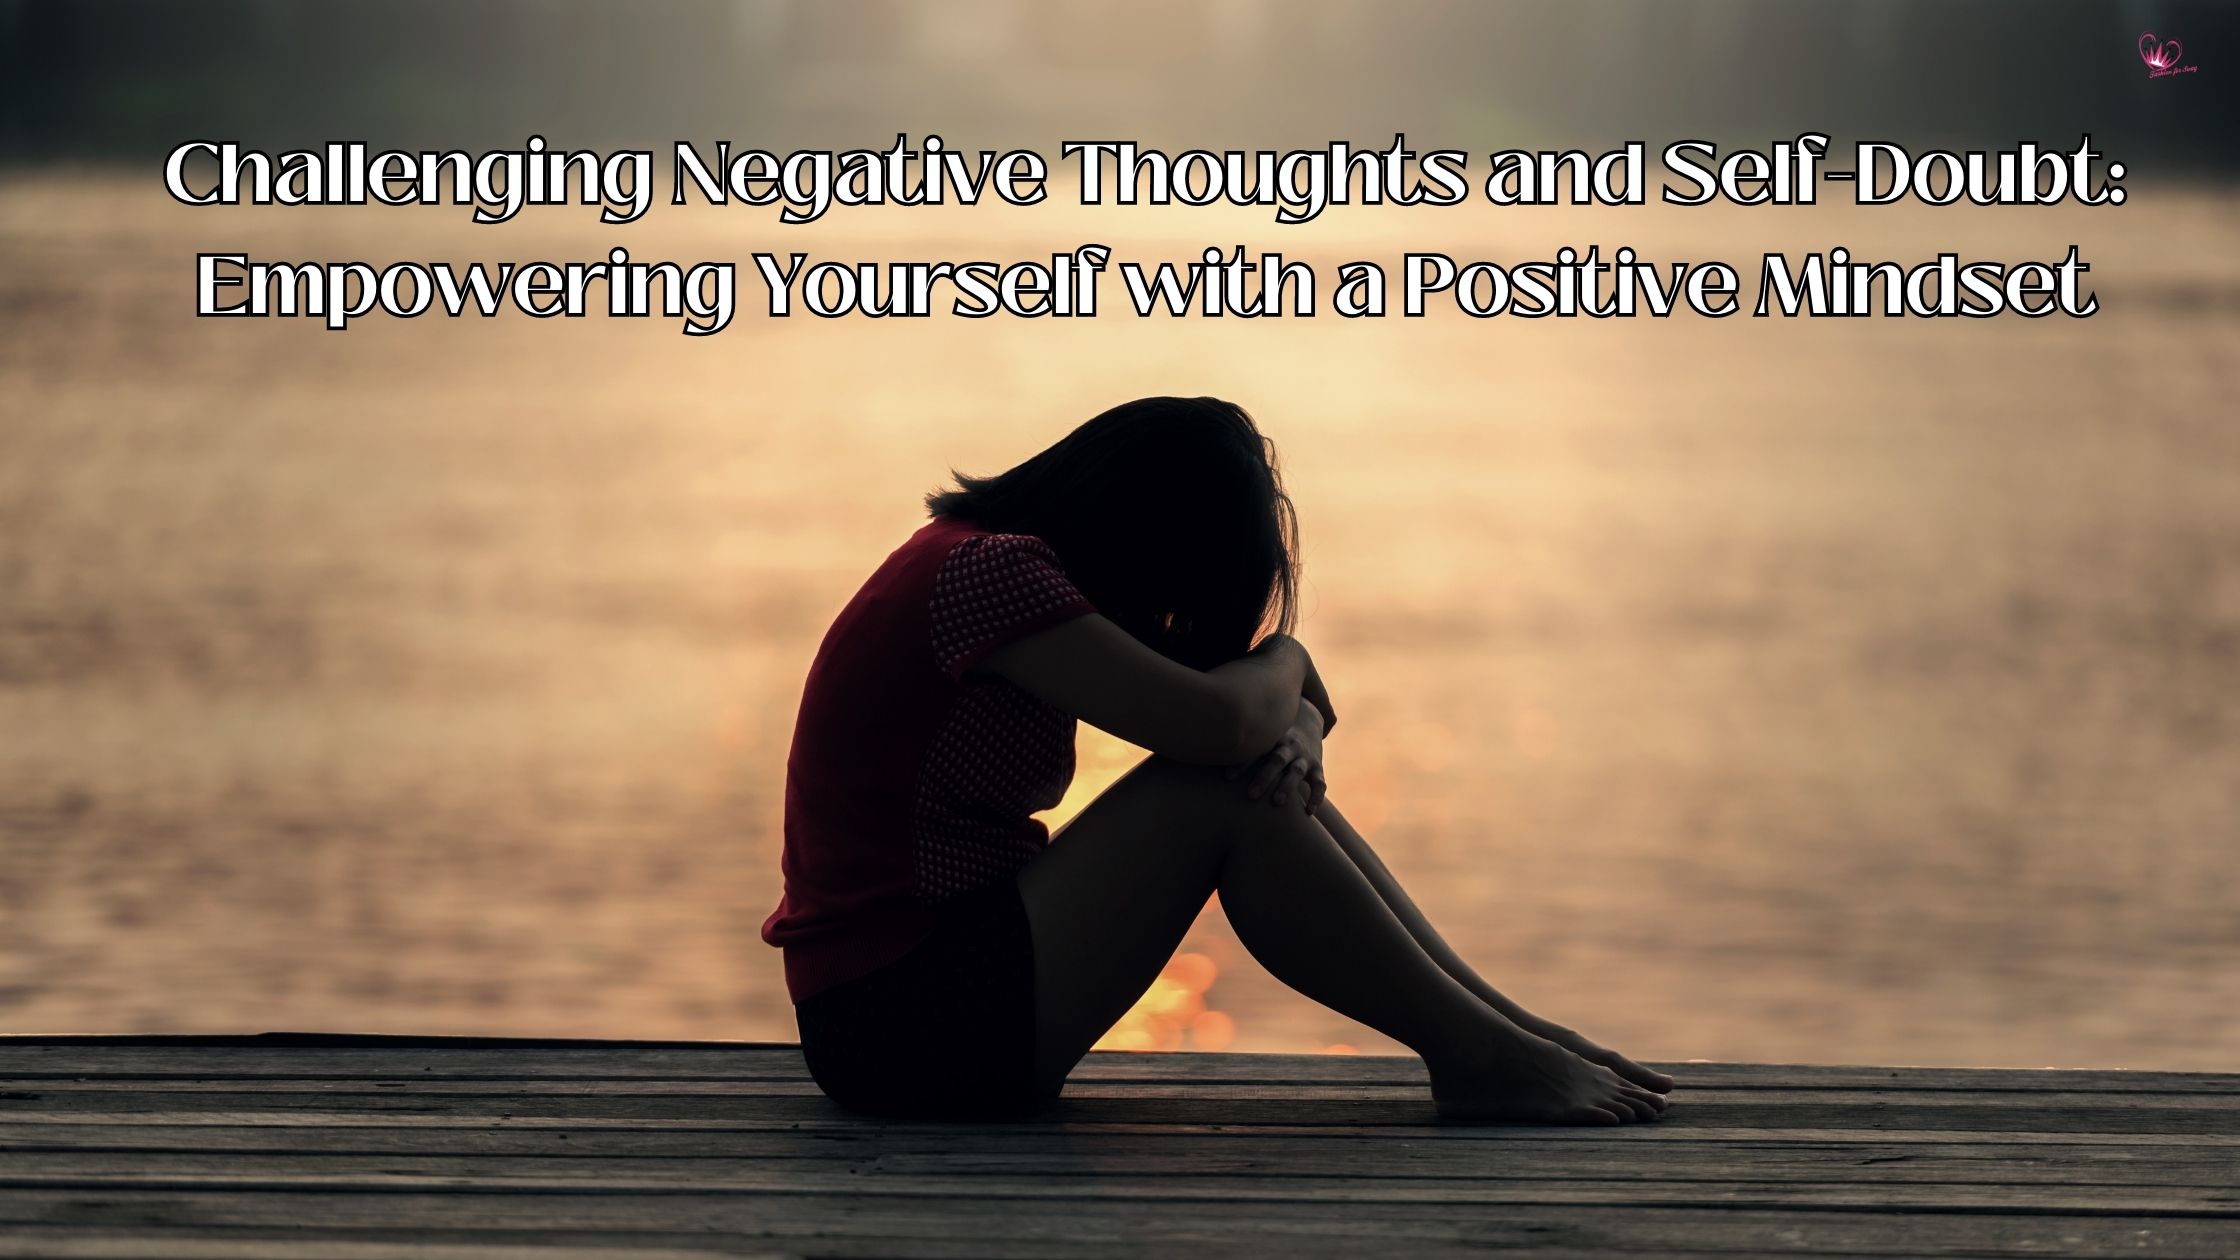 Challenging Negative Thoughts and Self-Doubt: Empowering Yourself with a Positive Mindset